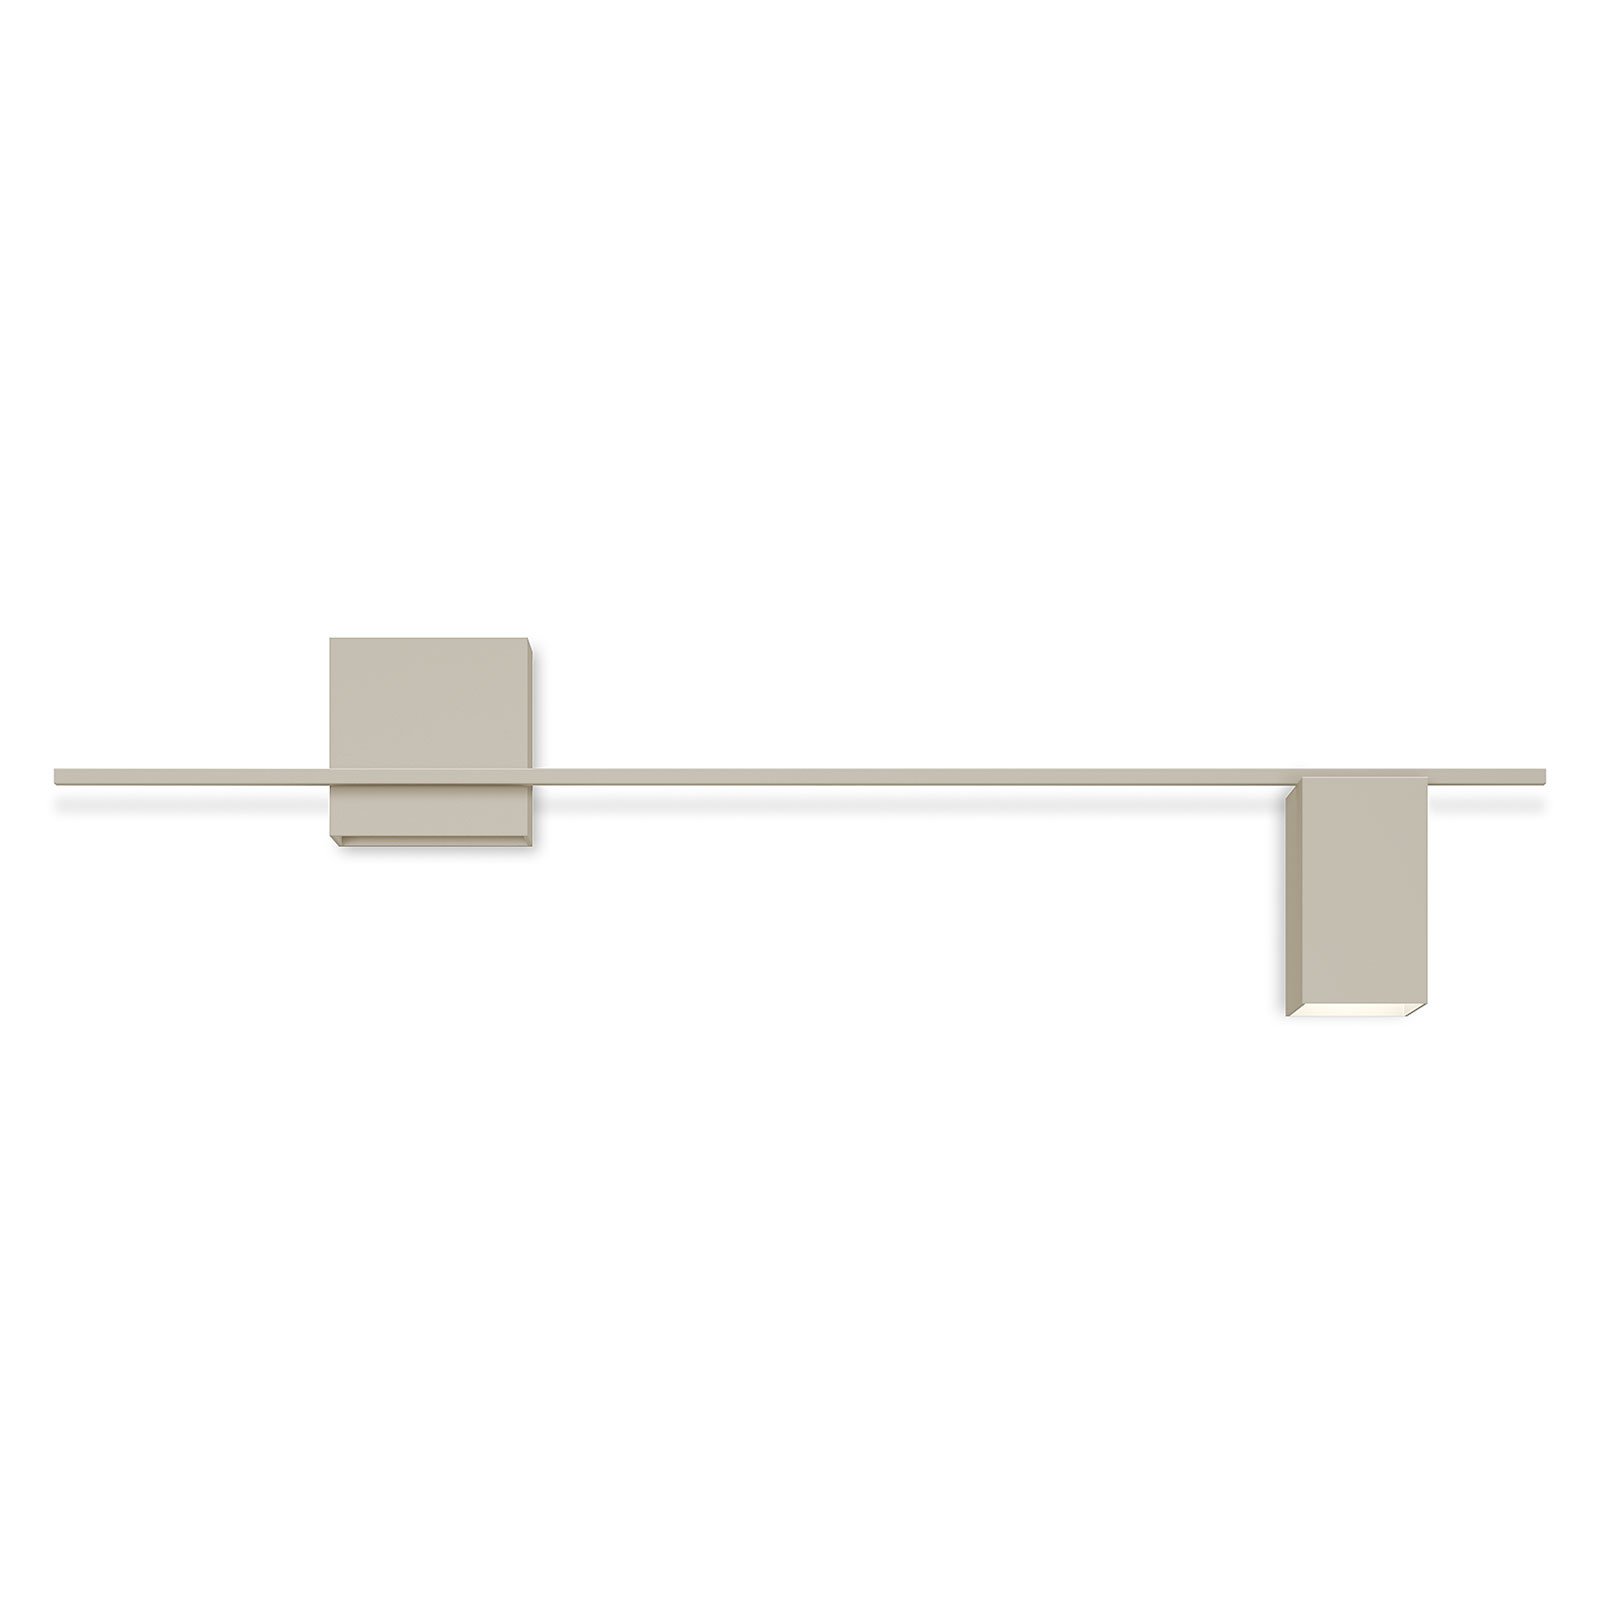 Vibia Structural 2610 LED wall light, light grey